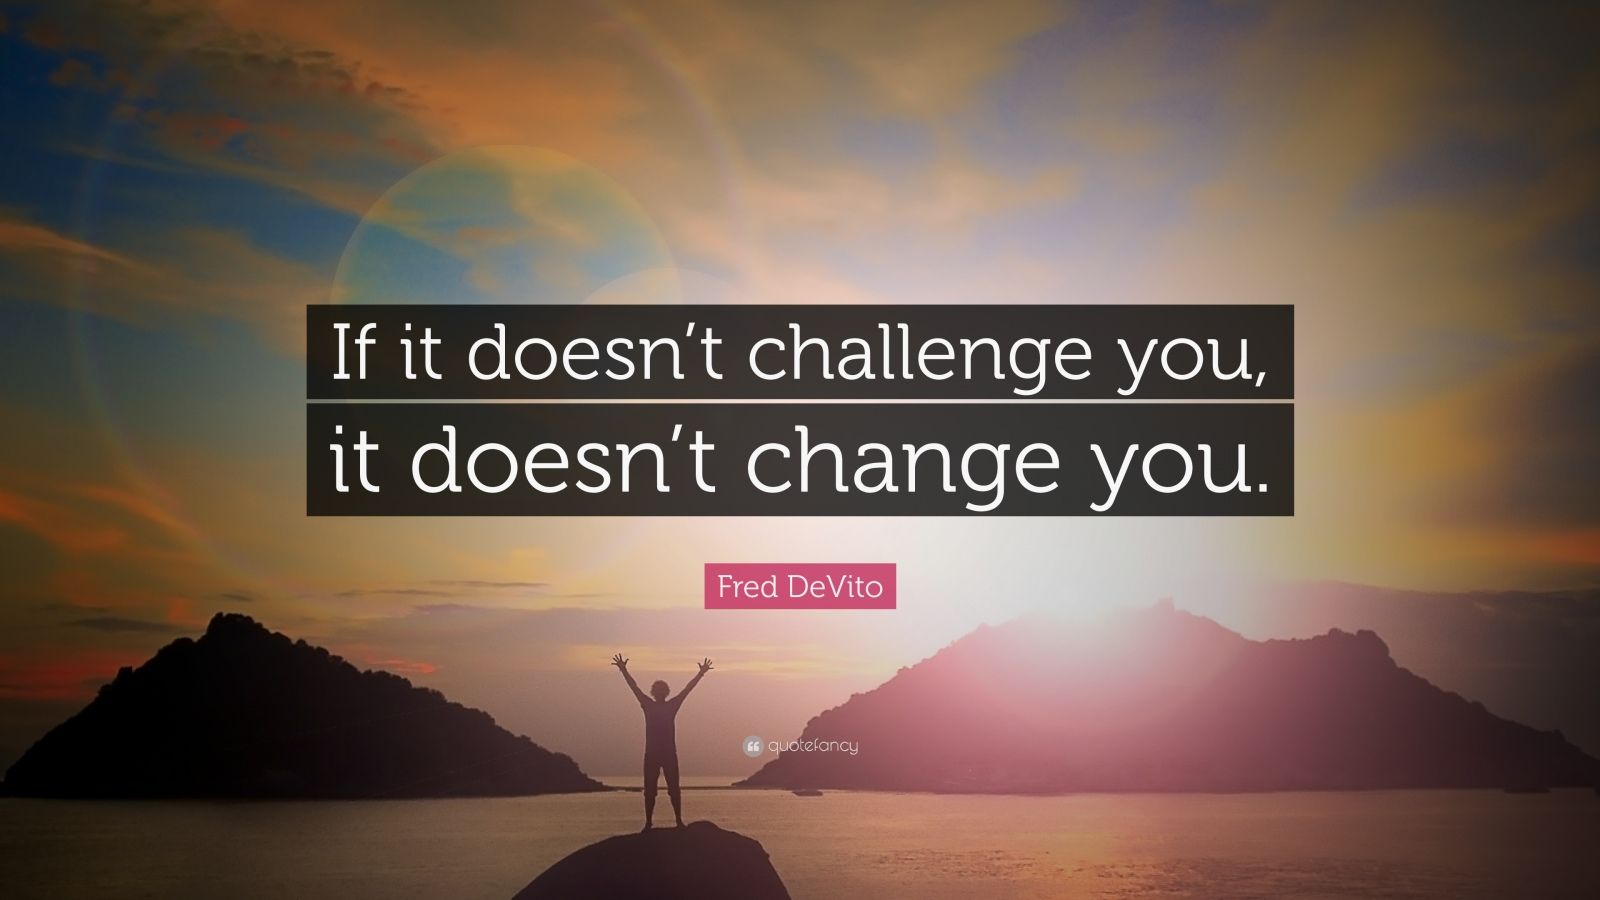 Fred DeVito Quote: “If it doesn’t challenge you, it doesn’t change you